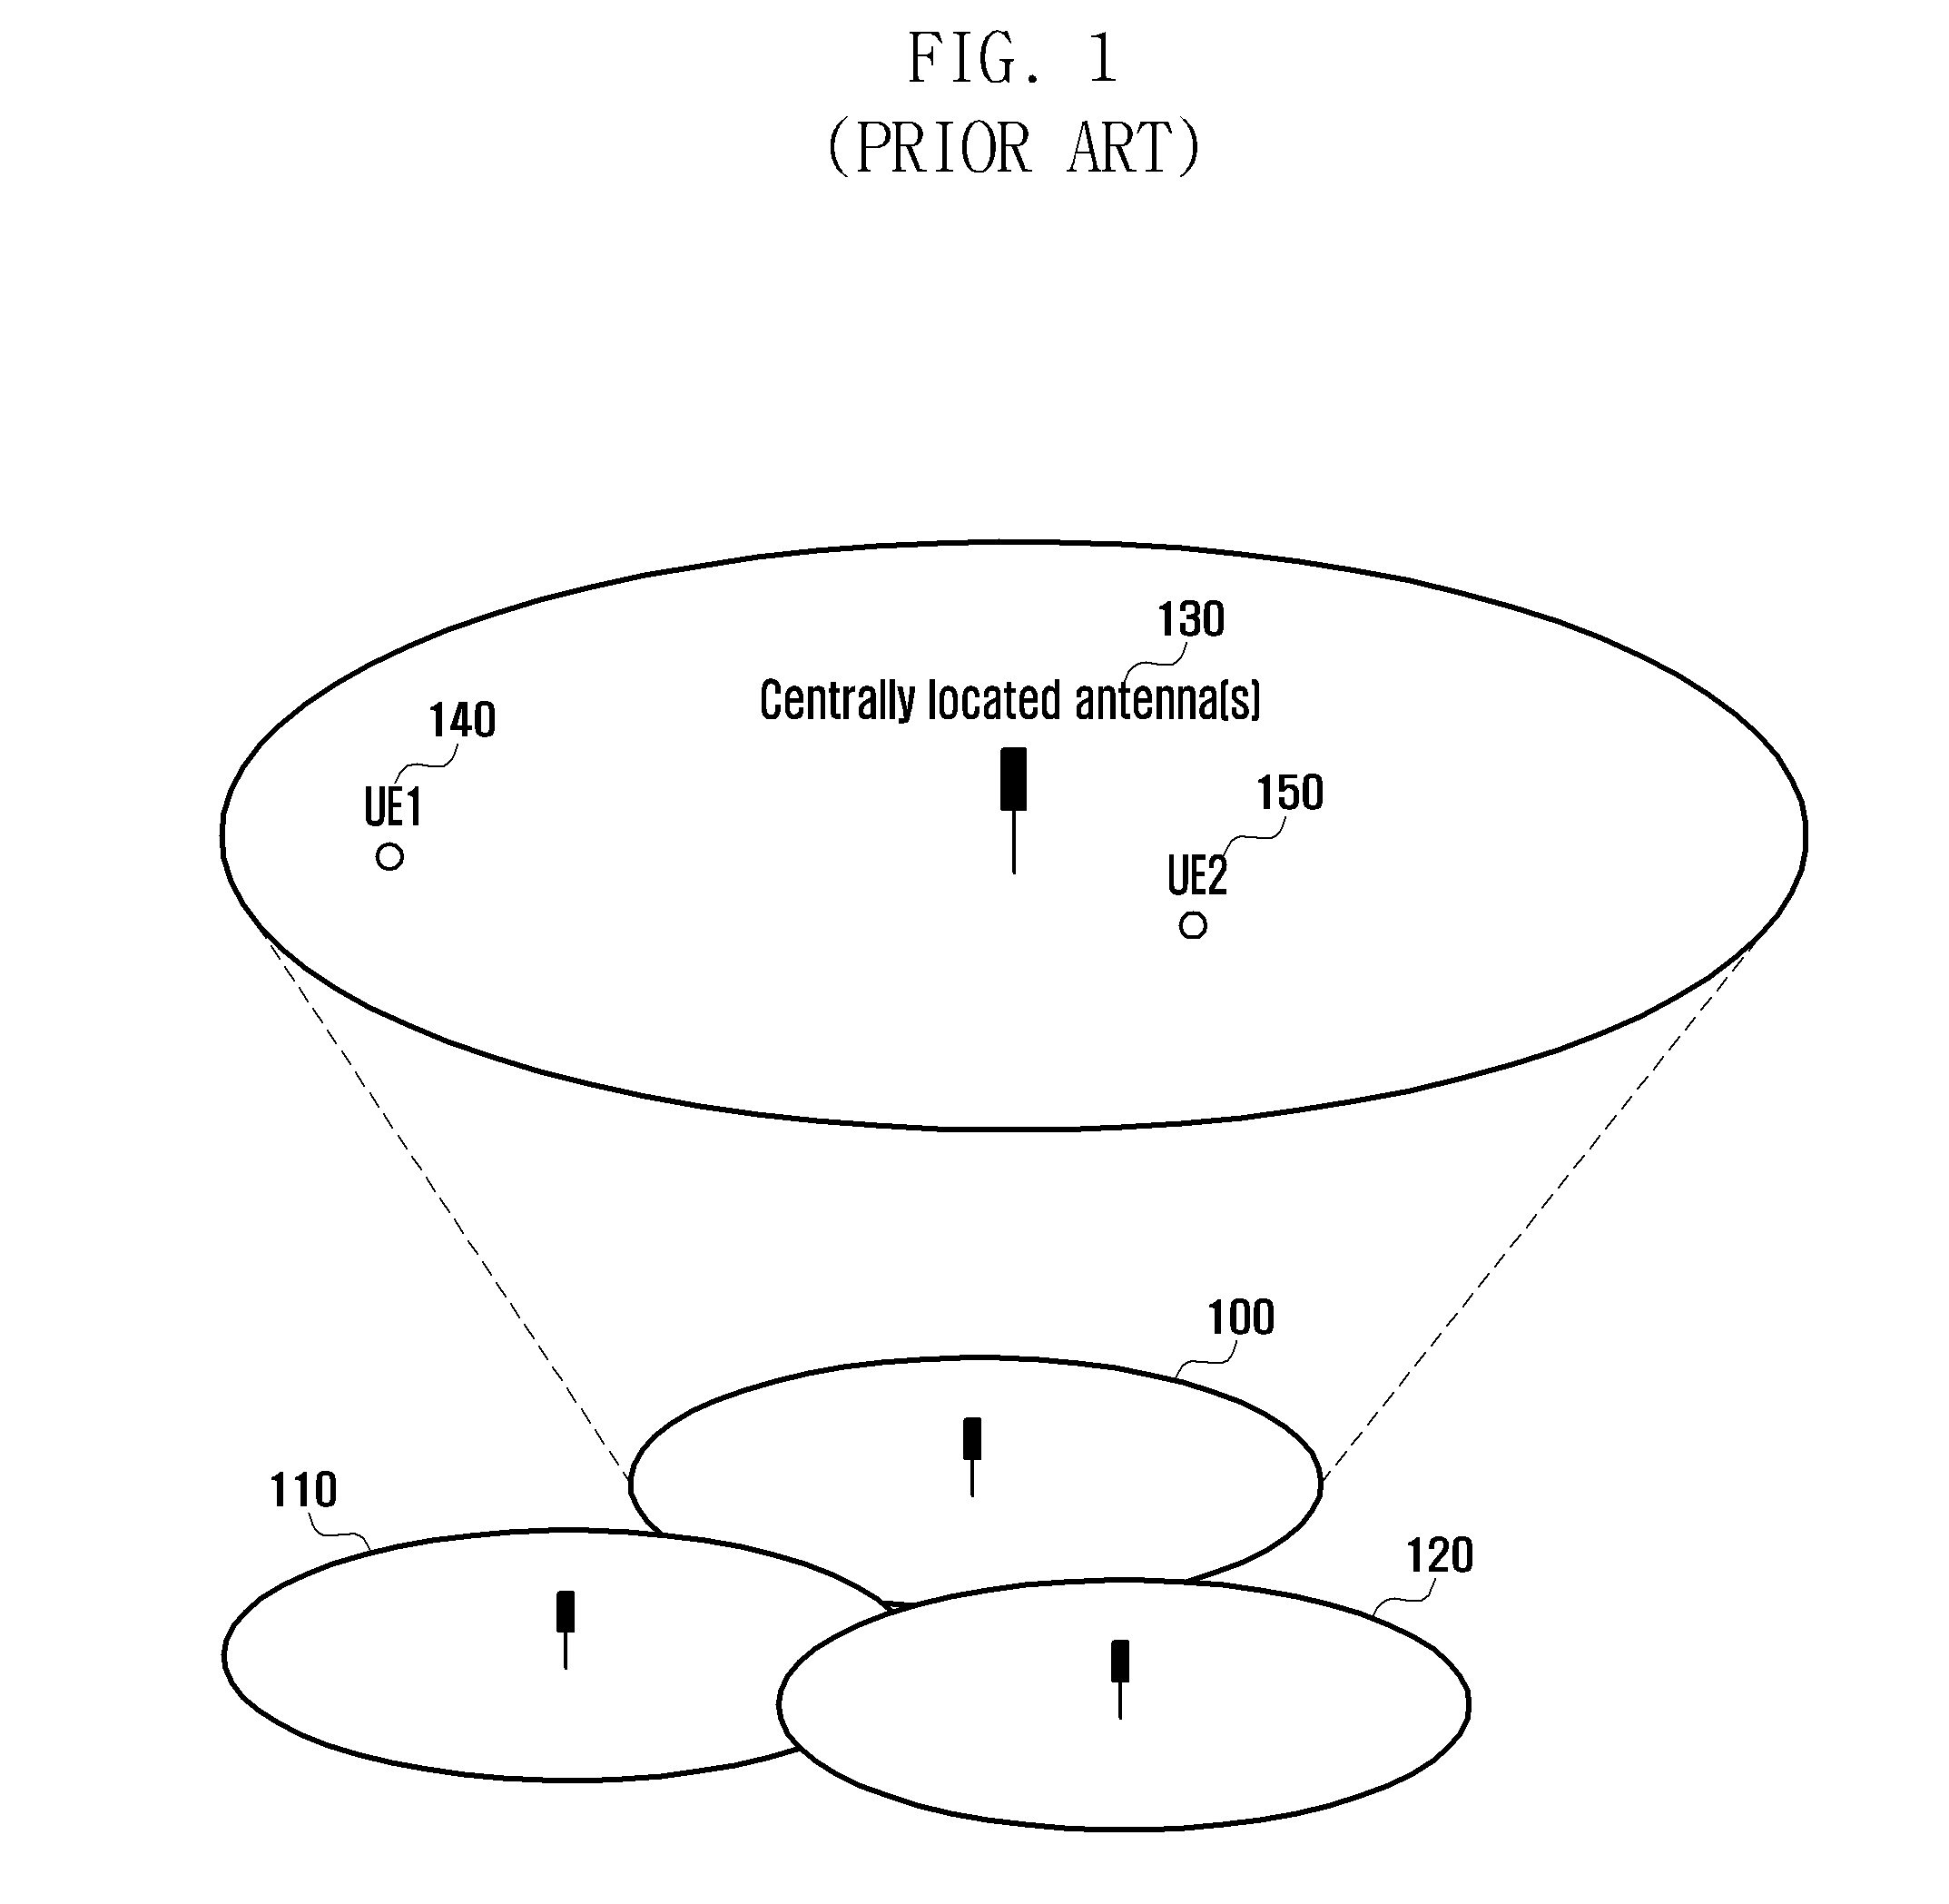 Uplink transmission power control method and apparatus for a distributed antenna mobile communication system